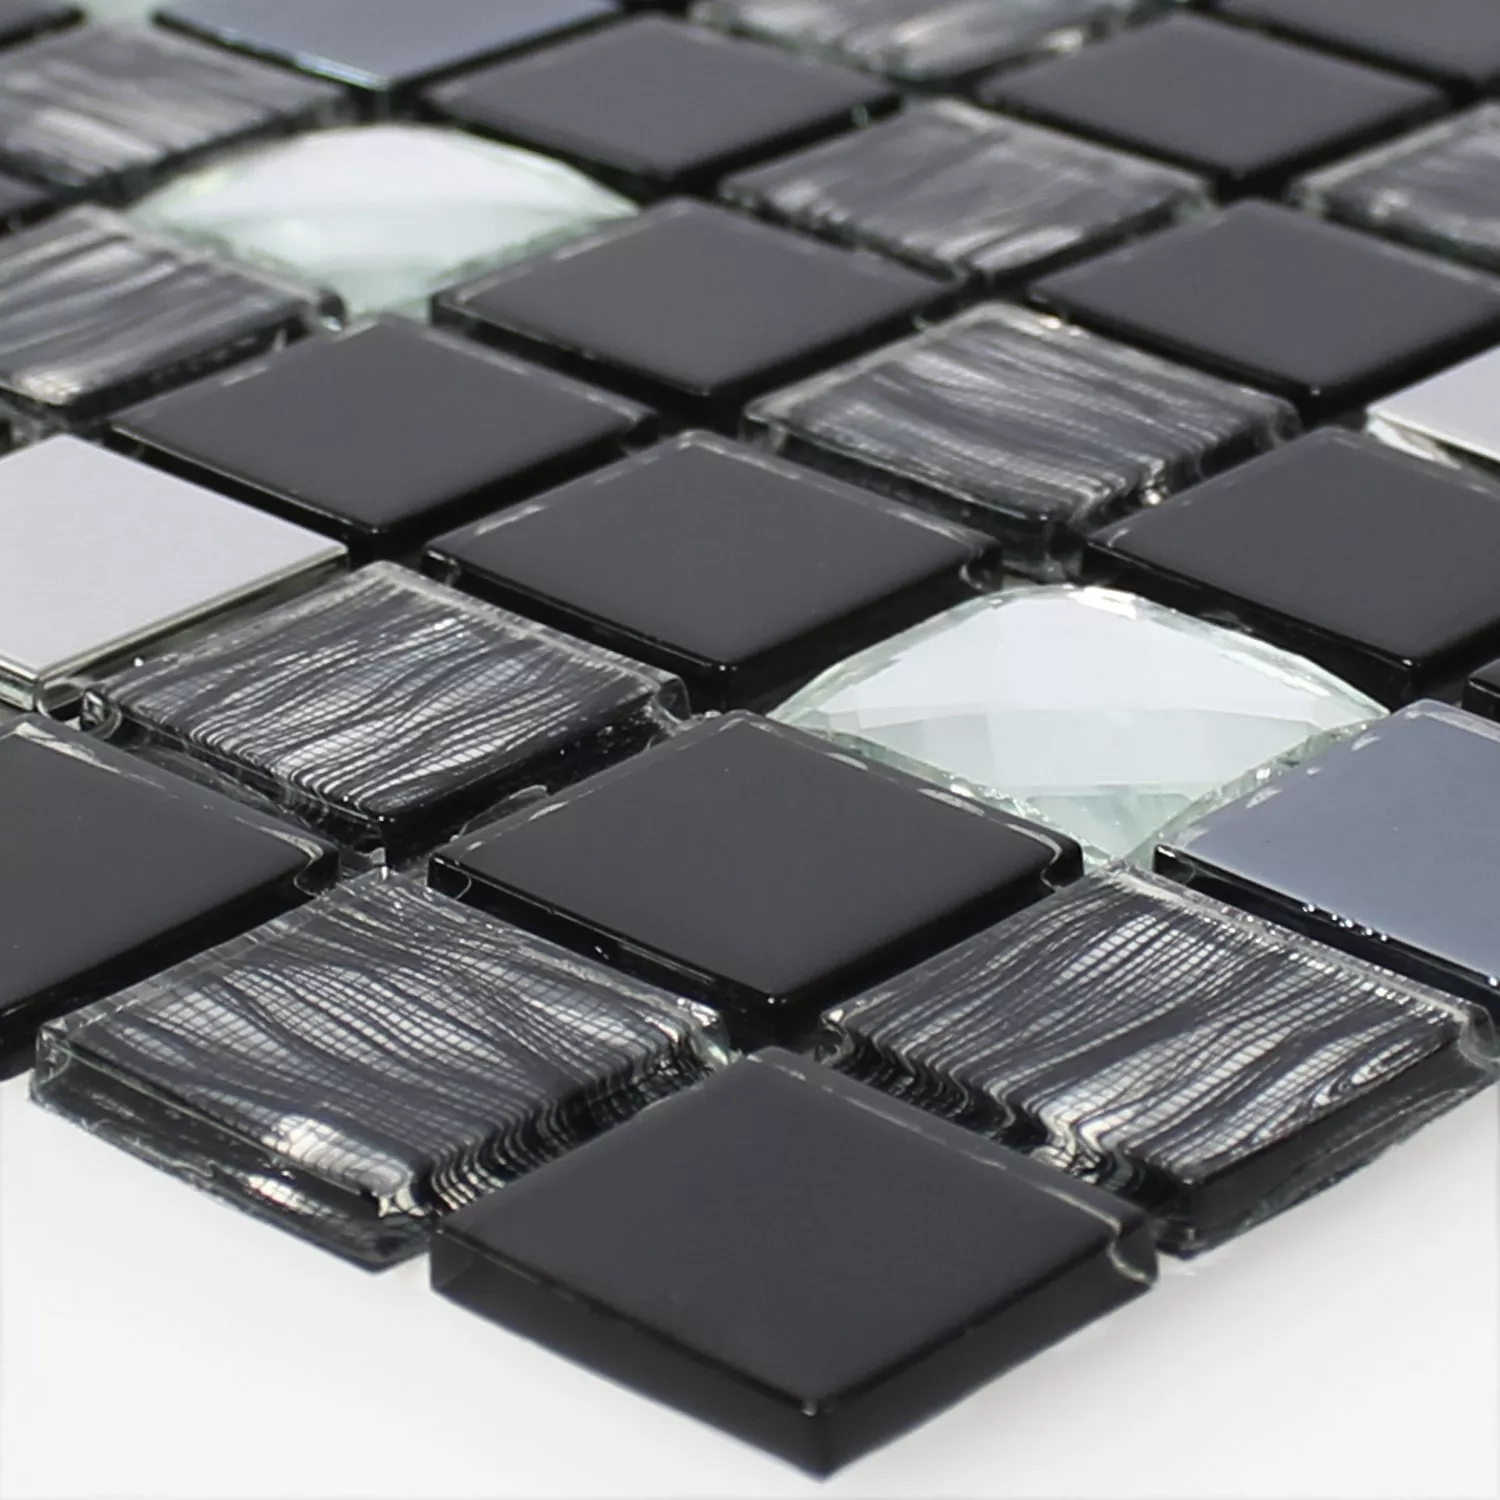 Mosaic Tiles Glass Stainless Steel Self Adhesive Black Silver